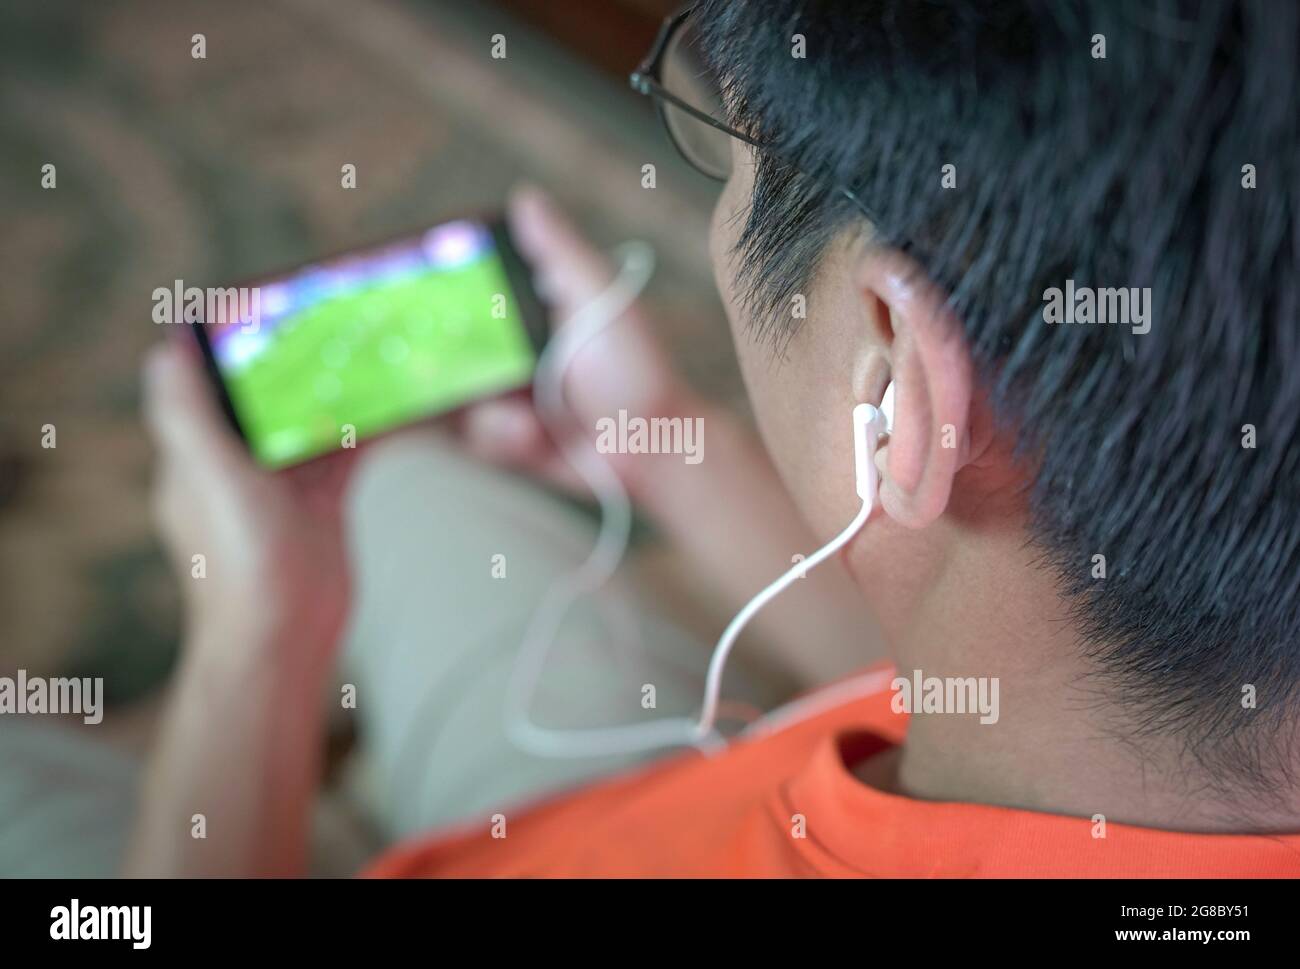 Man watching football and sport stream on mobile phone